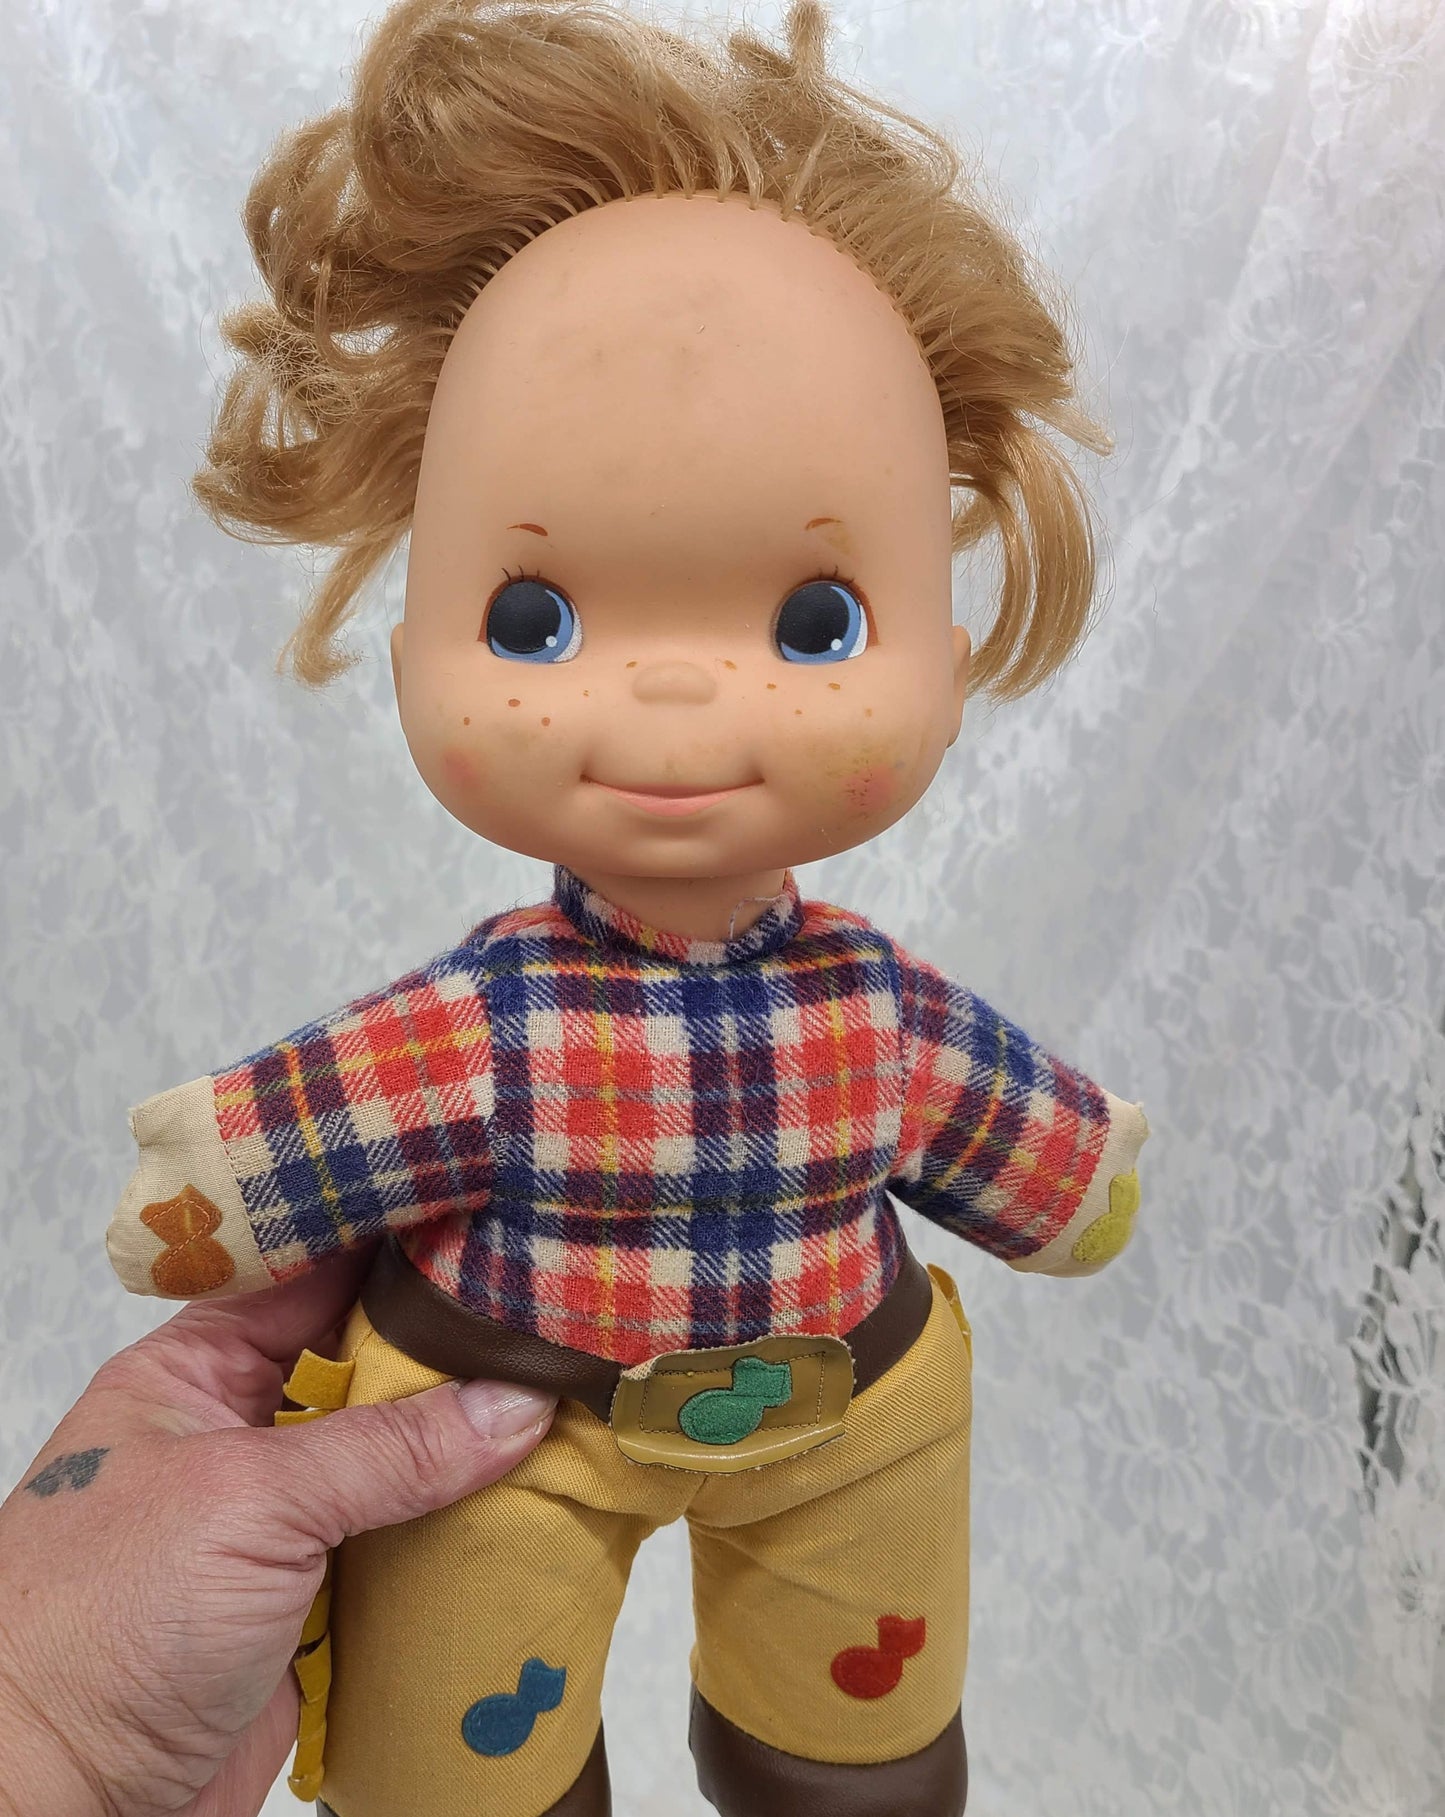 Vintage 1974 Mattel “Love Notes” Cowboy Squeeze Him for SOUNDS ~ 1970s Collectible Doll